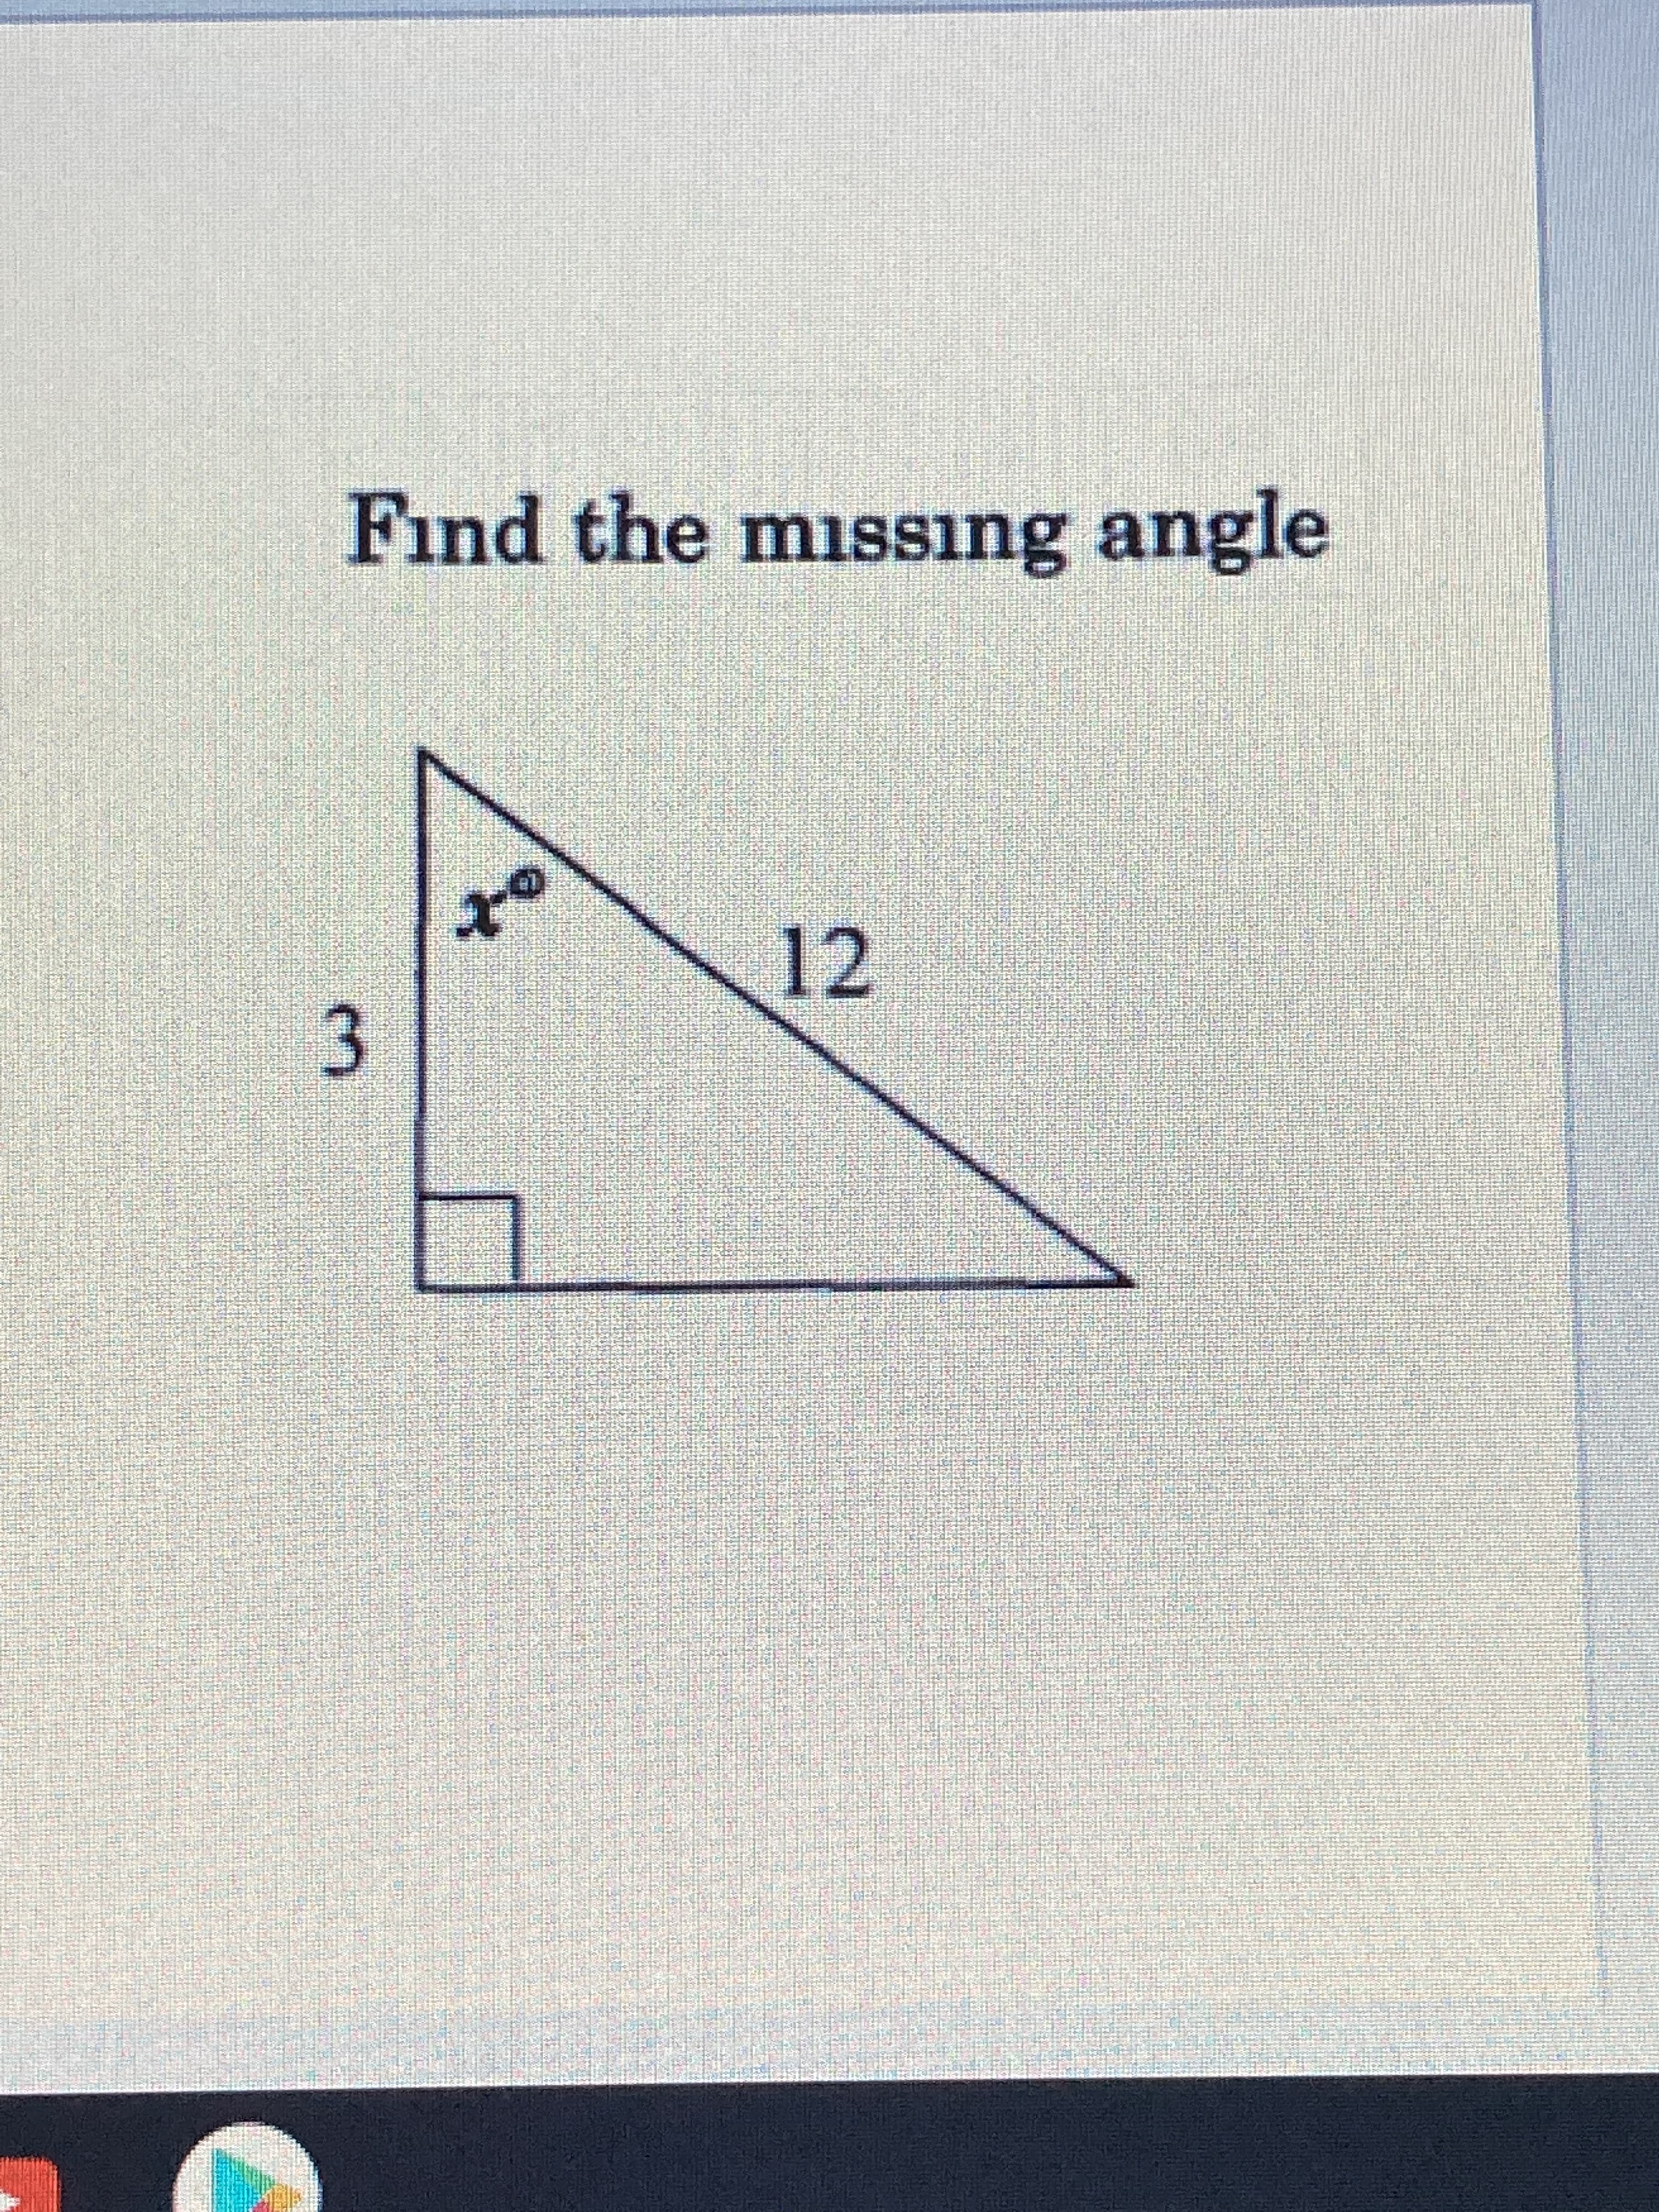 Find the missing angle
